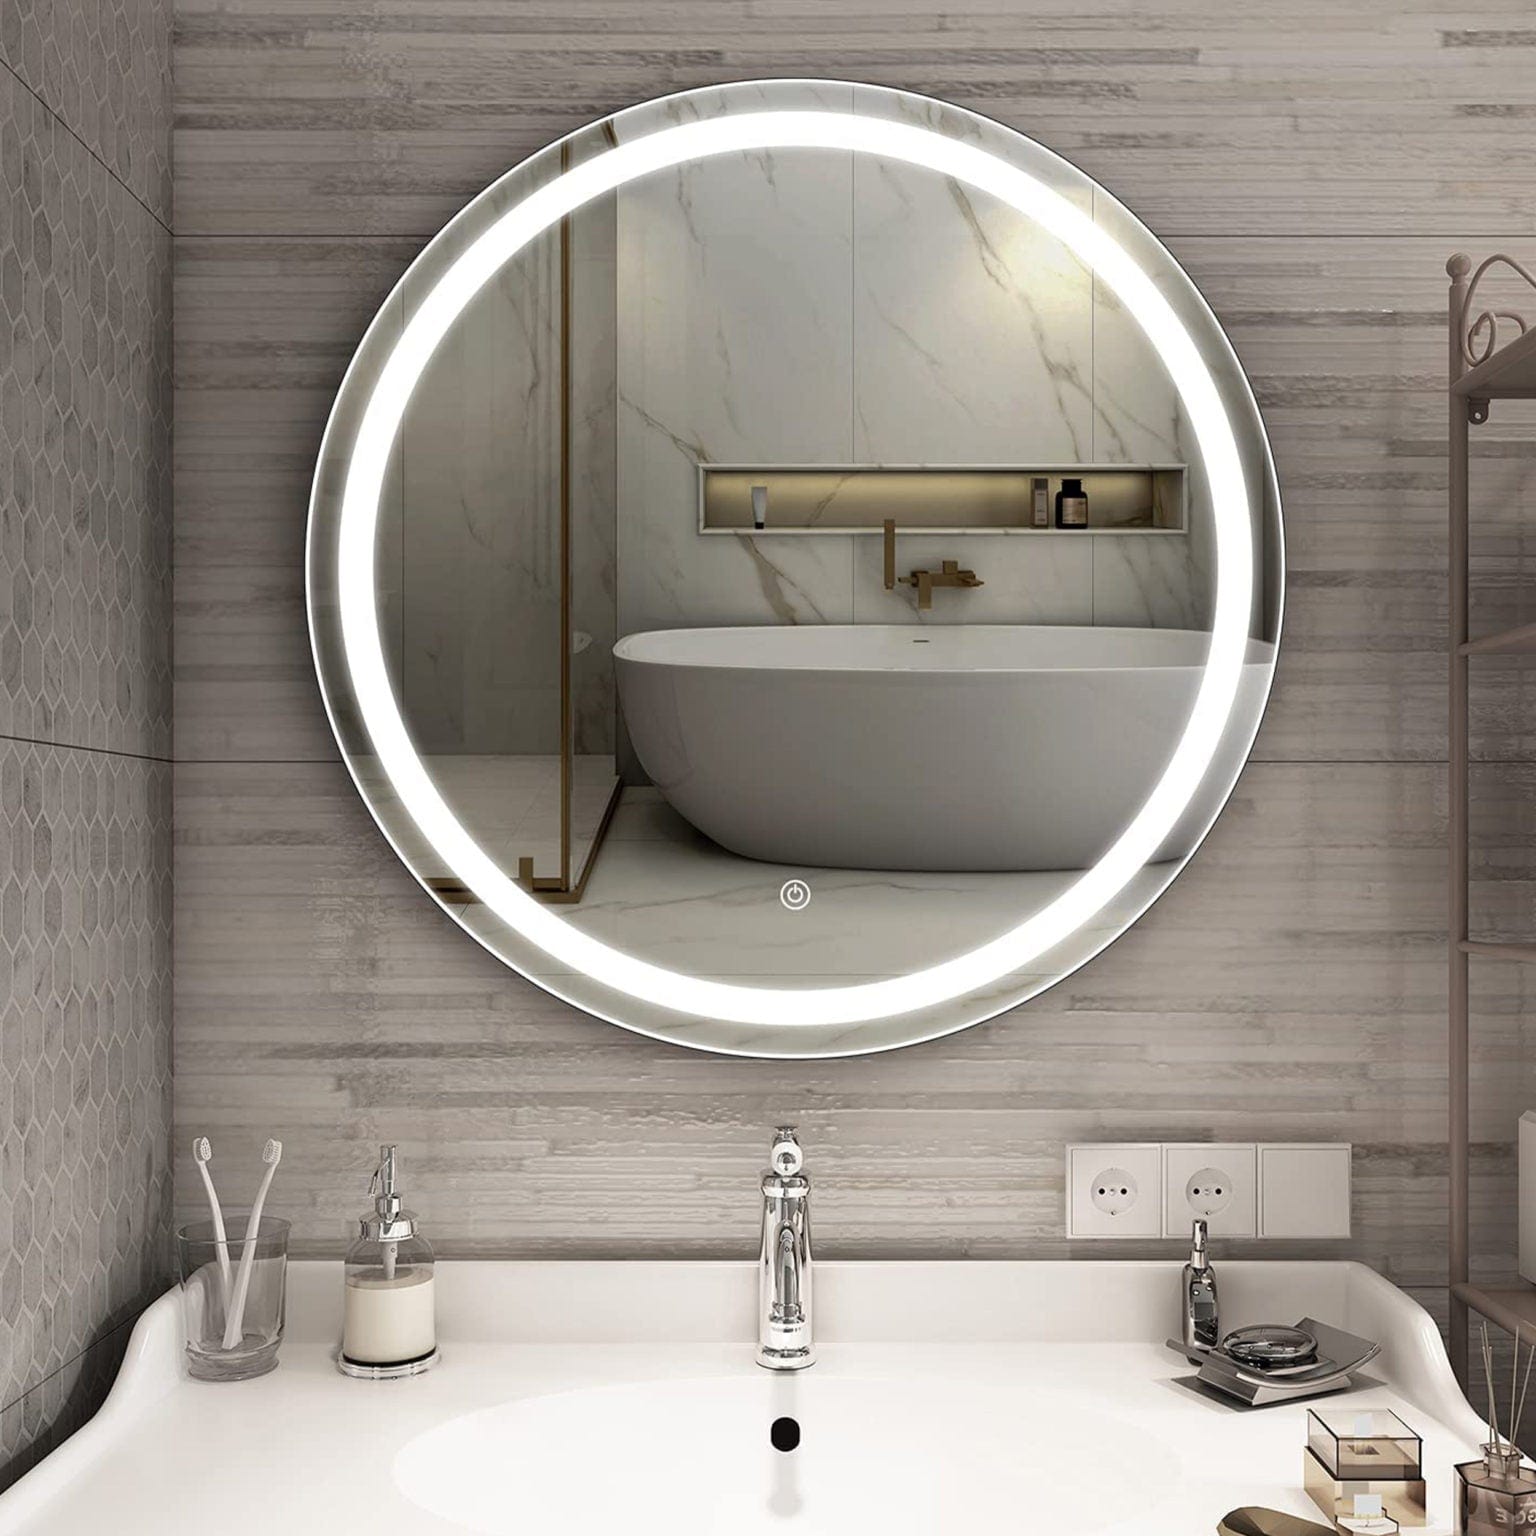 Buy Round LED Bathroom Wall-Mounted Vanity Mirror 60cm with 3 Color Light - 6112/60 | Shop at Supply Master Accra, Ghana Shower Caddy & Mirror Buy Tools hardware Building materials